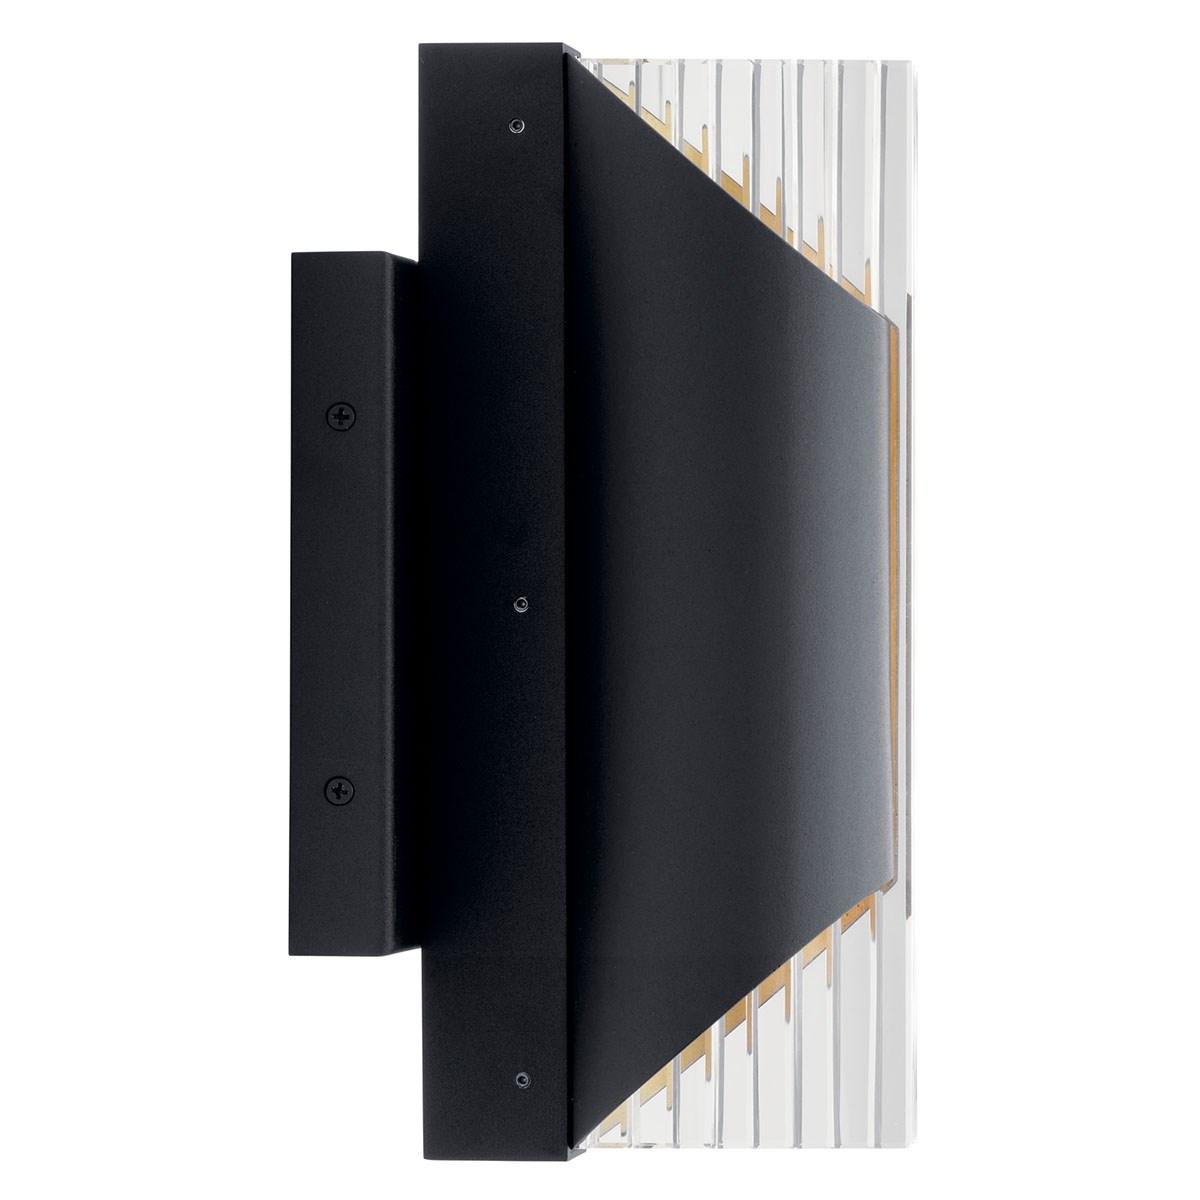 Astalis 12 in. LED Outdoor Wall Sconce 3000K Textured Black Finish